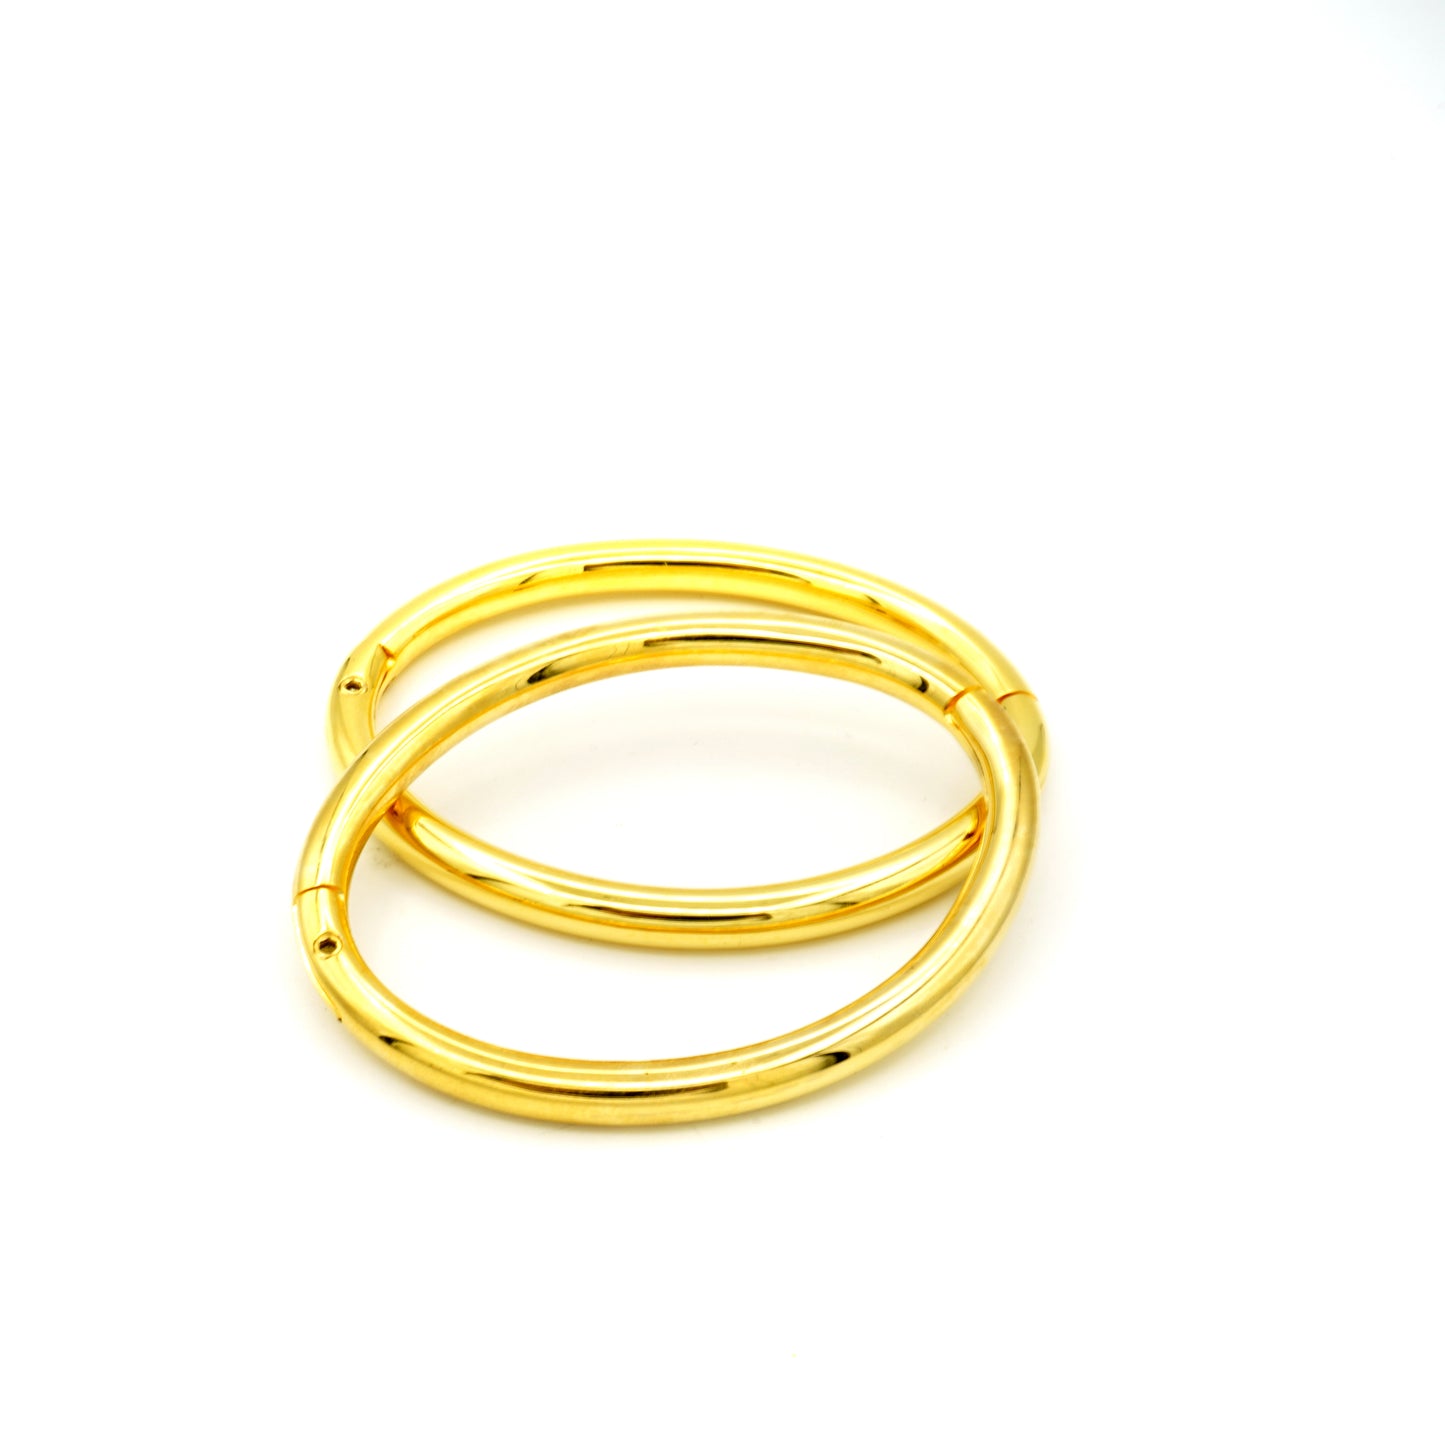 Thin locking jewelry bangles in black or polished gold with key